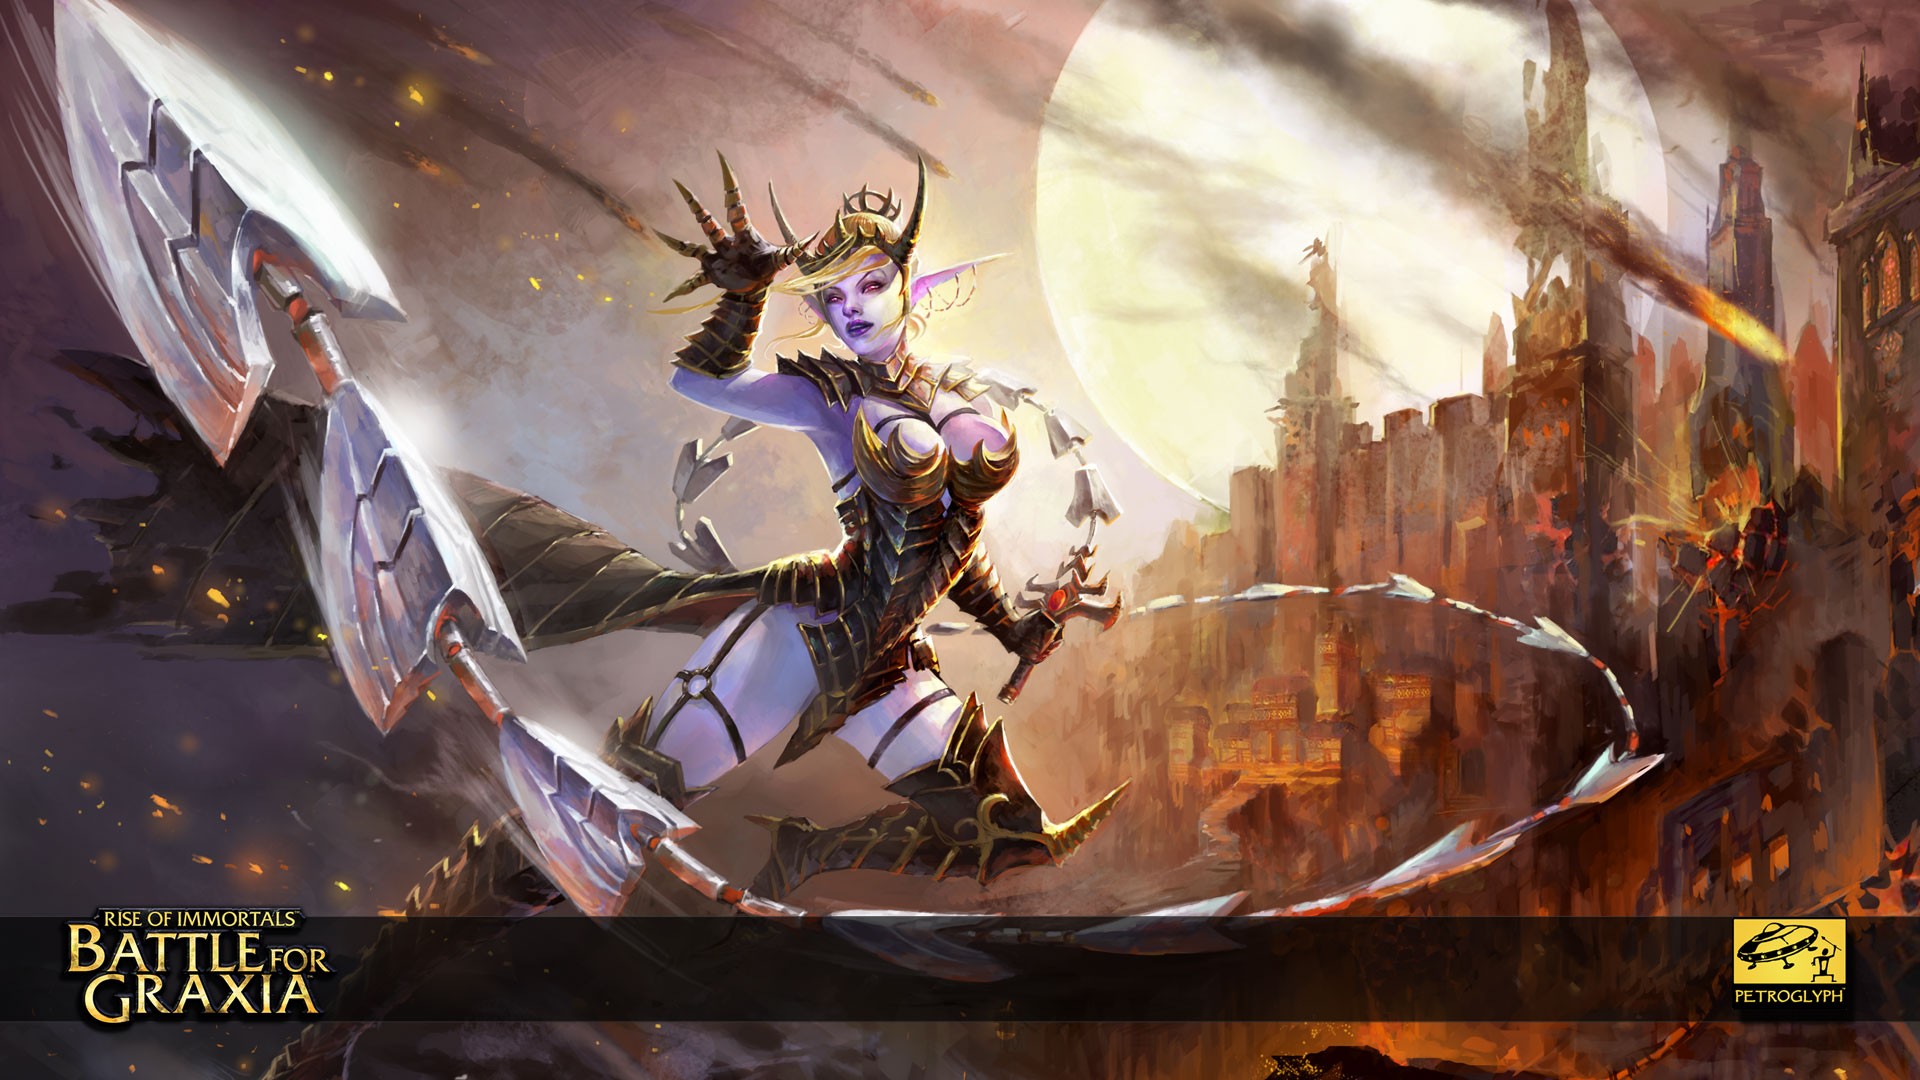 Rise Of Immortals: Battle For Graxia Wallpapers